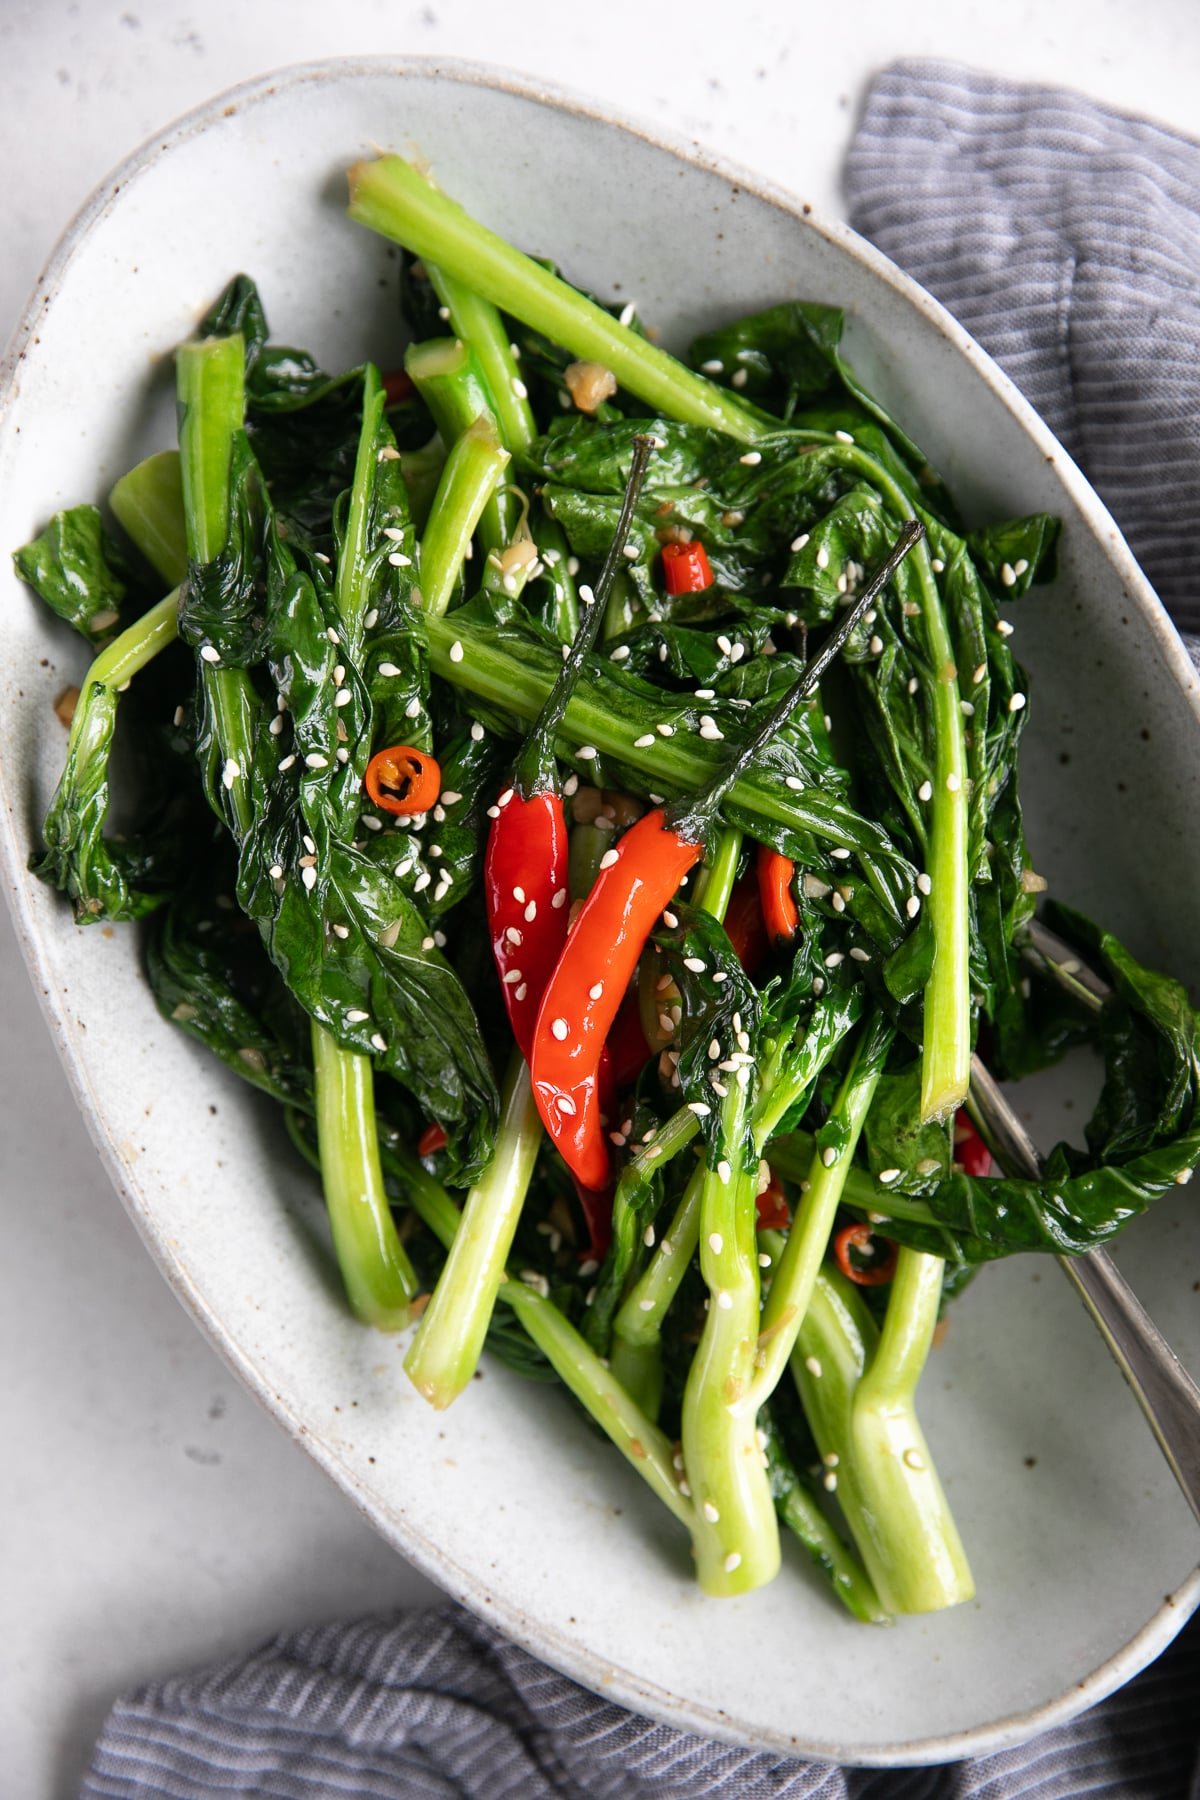 Oval serving plate filled with stir fried Chinese broccoli garnished with sesame seeds.